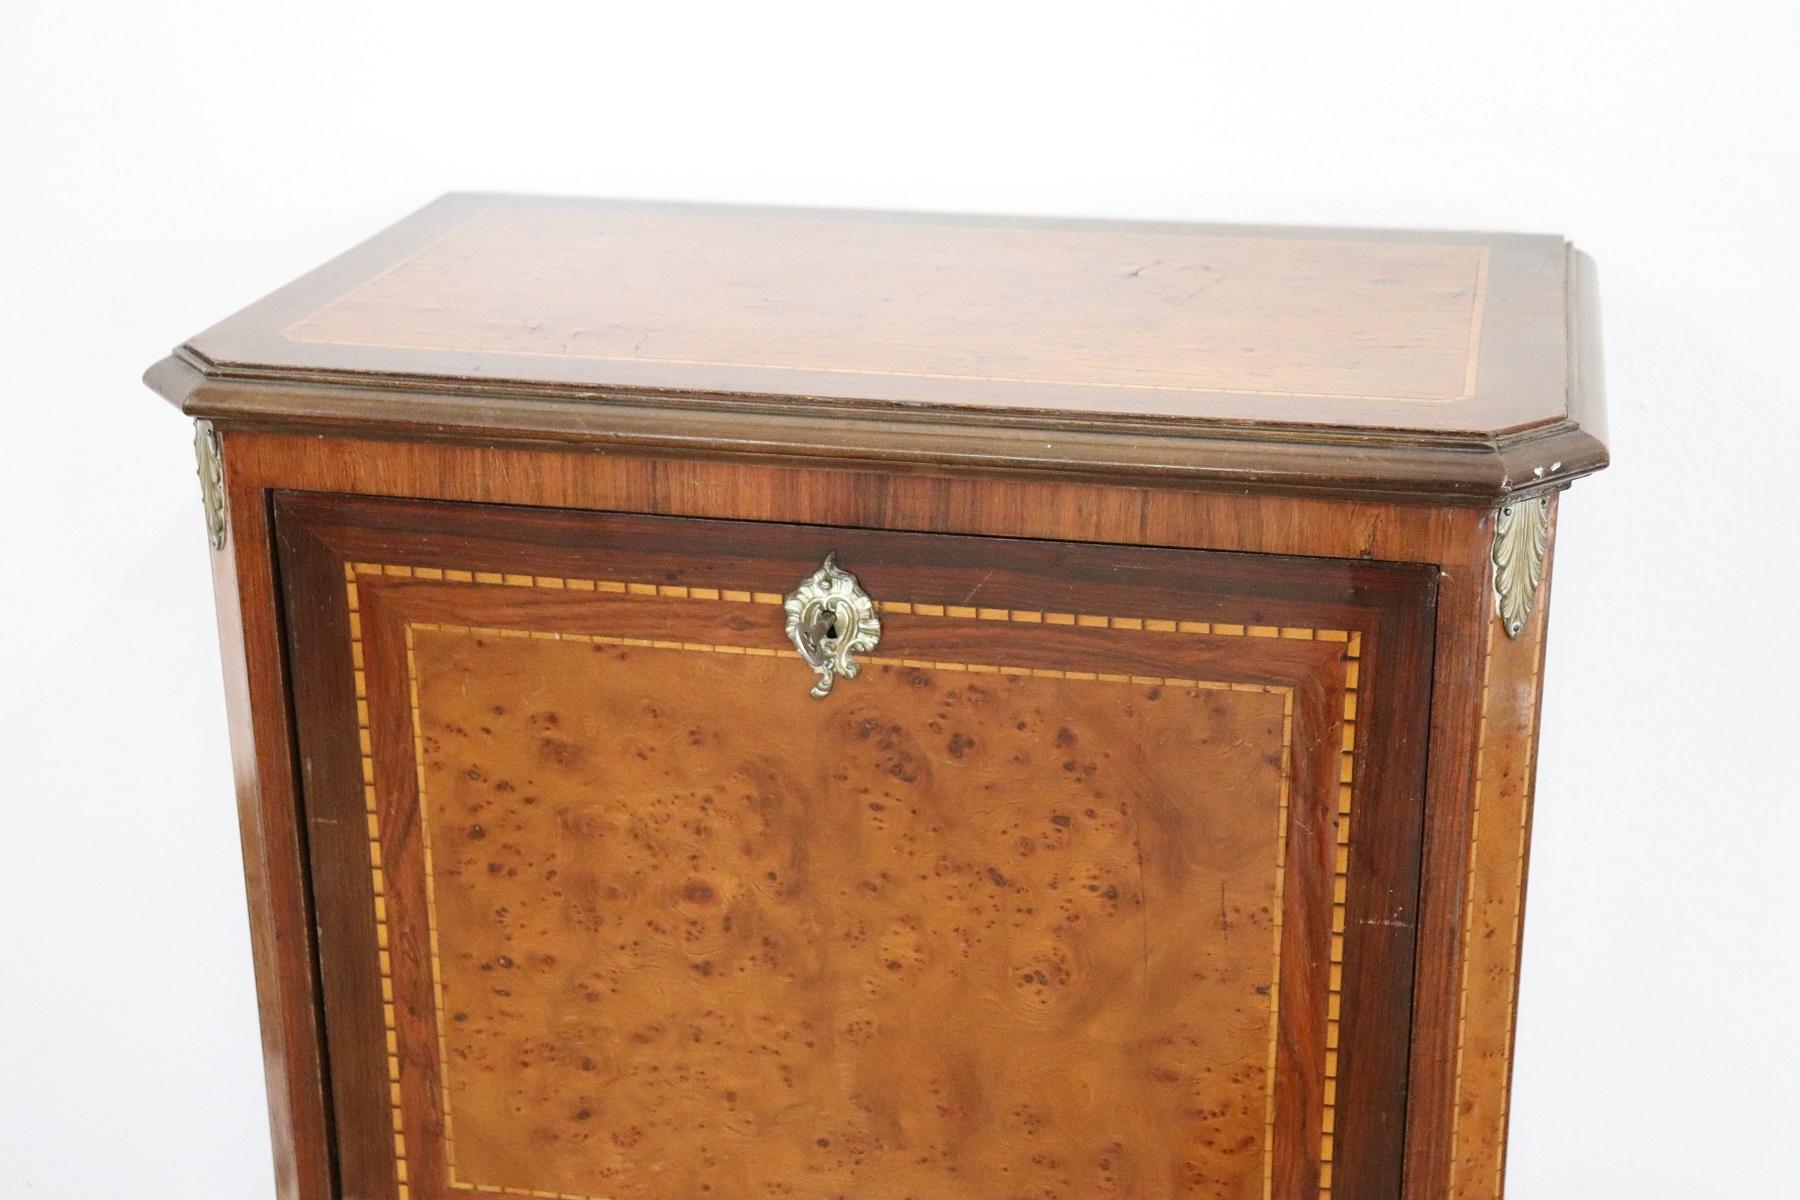 Louis XV style furniture richly adorned with gilded and chiselled bronze. The fine bois de rose wood with inlay. On the front and on the sides precious birch wood briar. Mobile very elegant but also practical for use with three comfortable drawers.